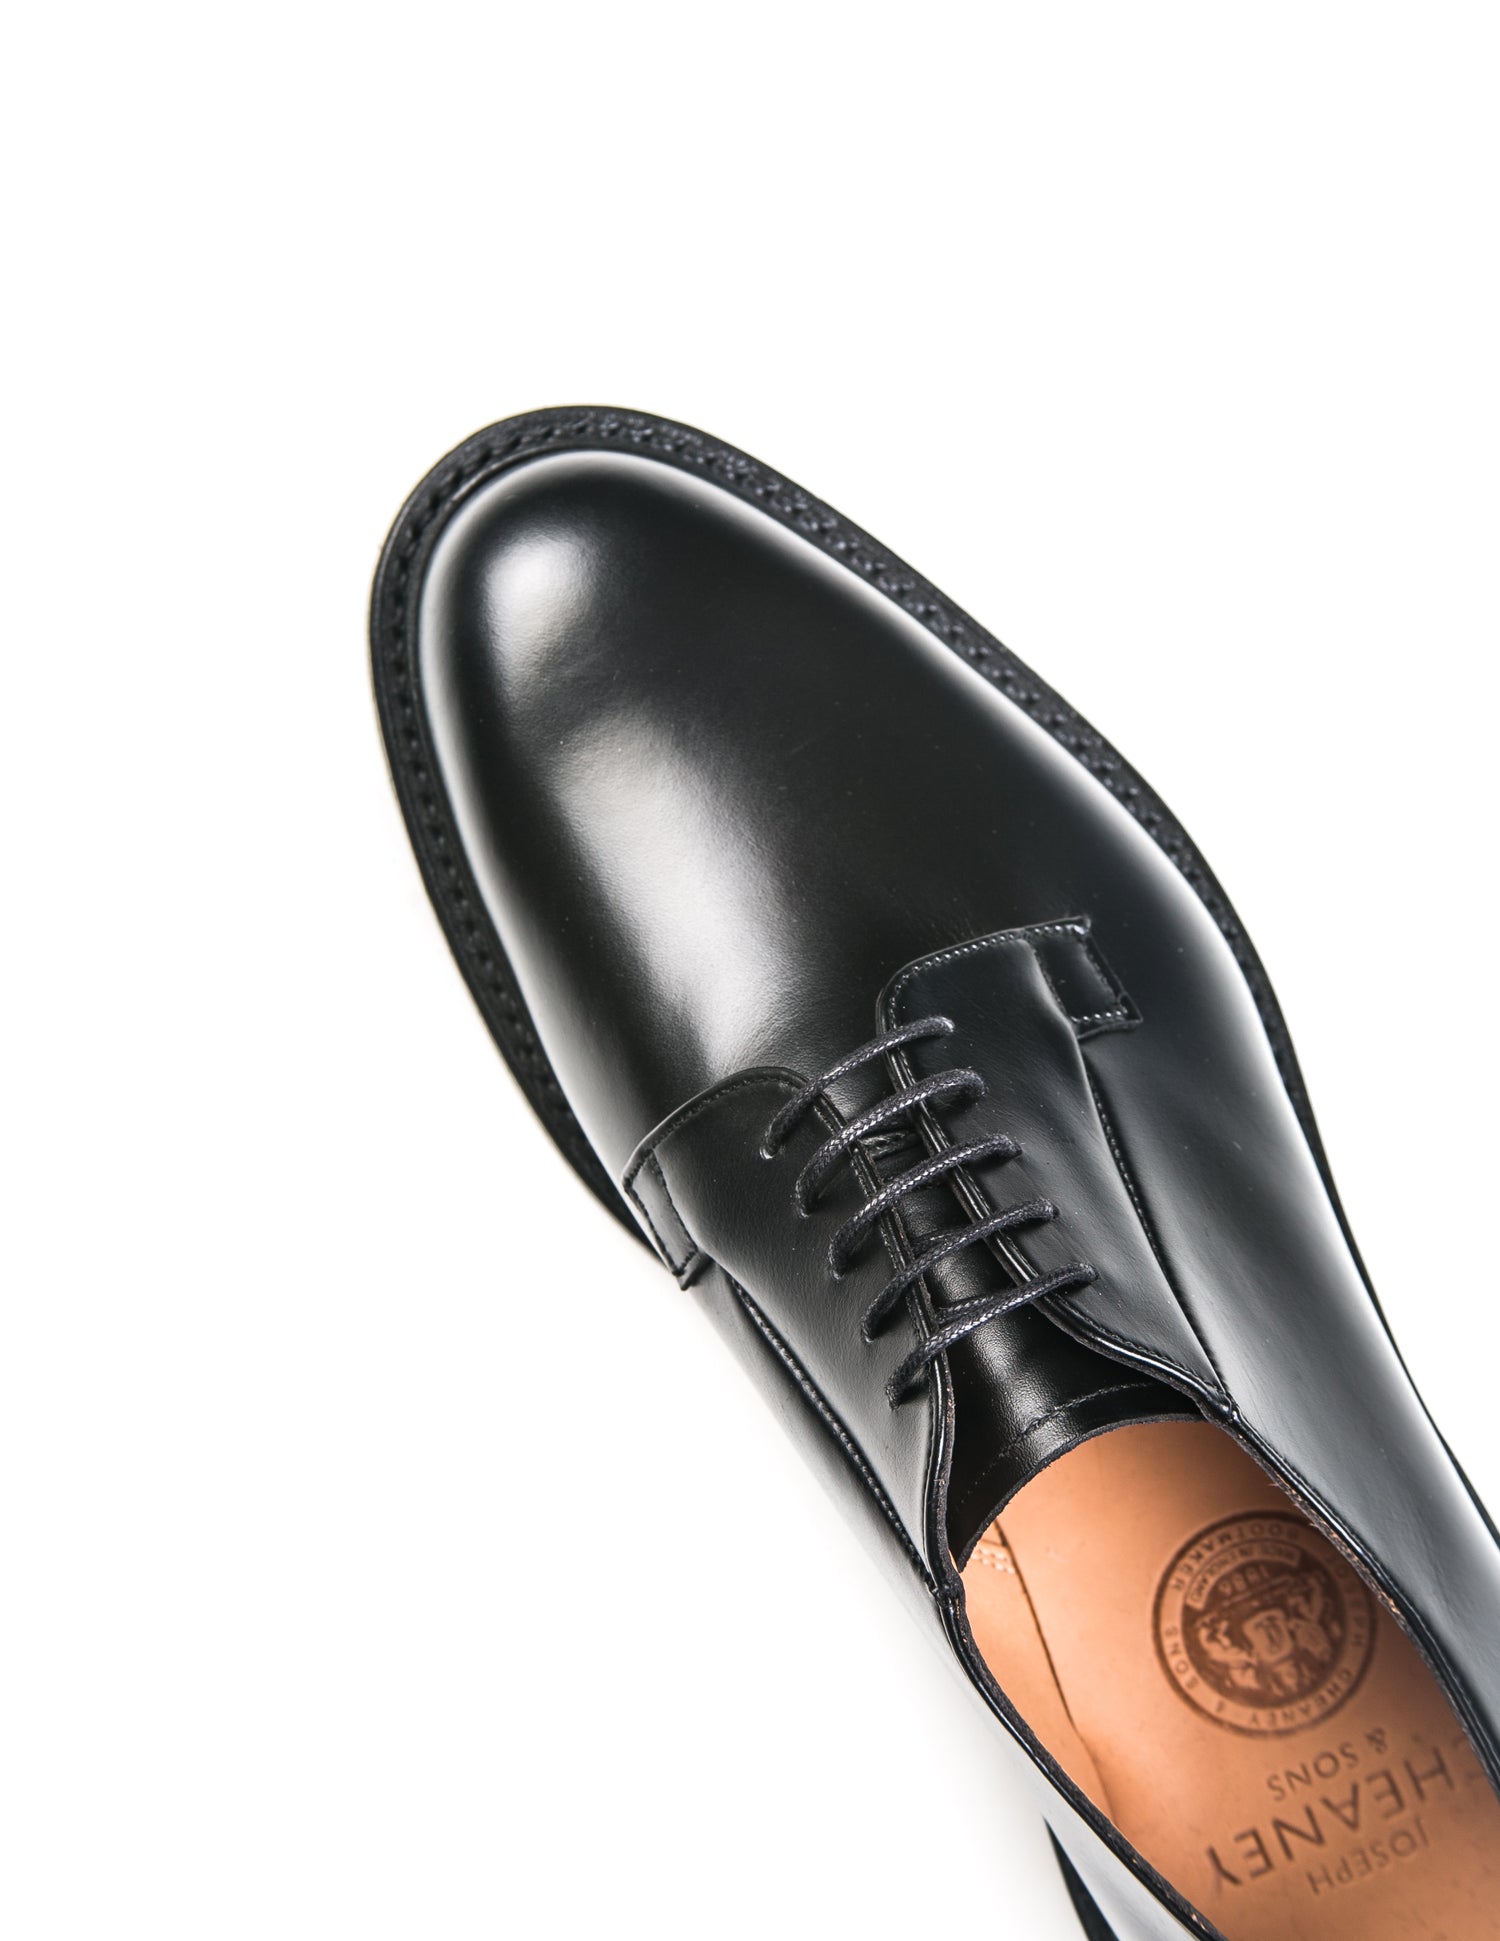 Detail shot of Joseph Cheaney Deal II Derby in Black Calf Leather showing laces, toe, and interior